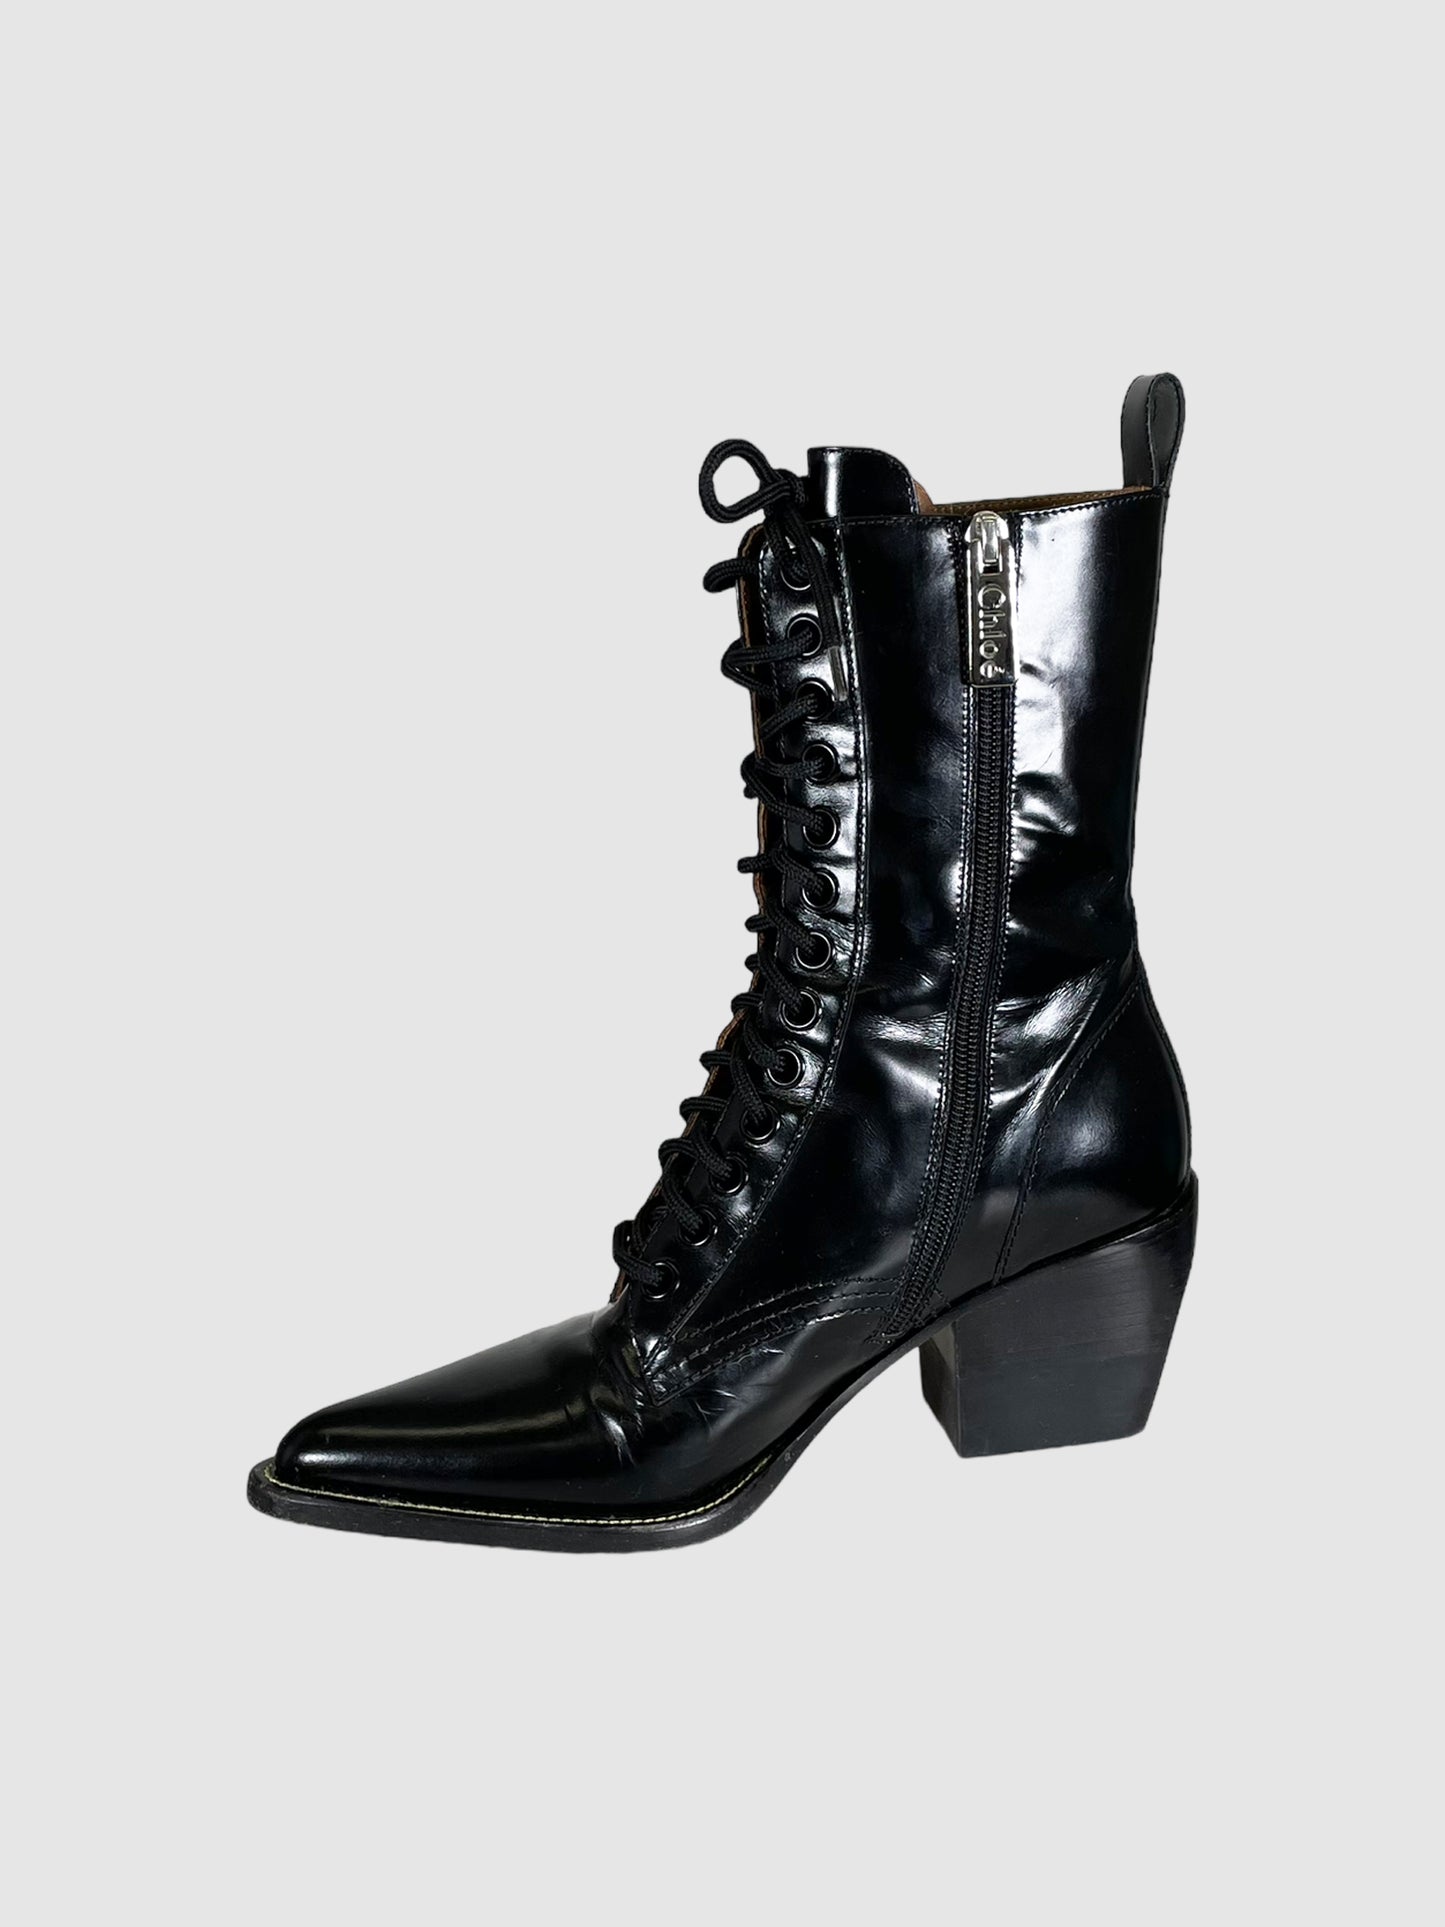 Chloé Leather Lace-Up Boots - Size 40